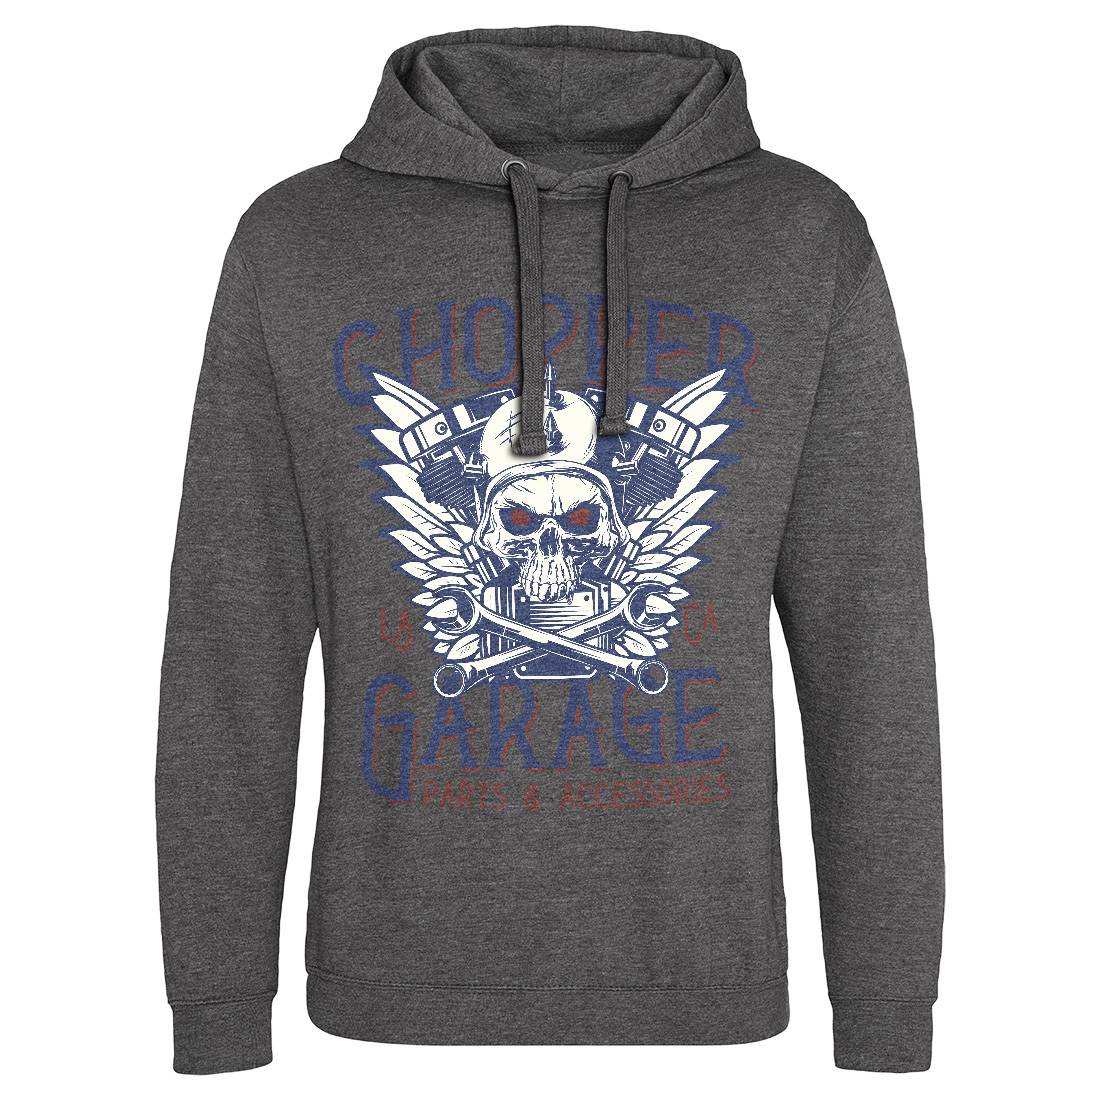 Chopper Garage Mens Hoodie Without Pocket Motorcycles D918